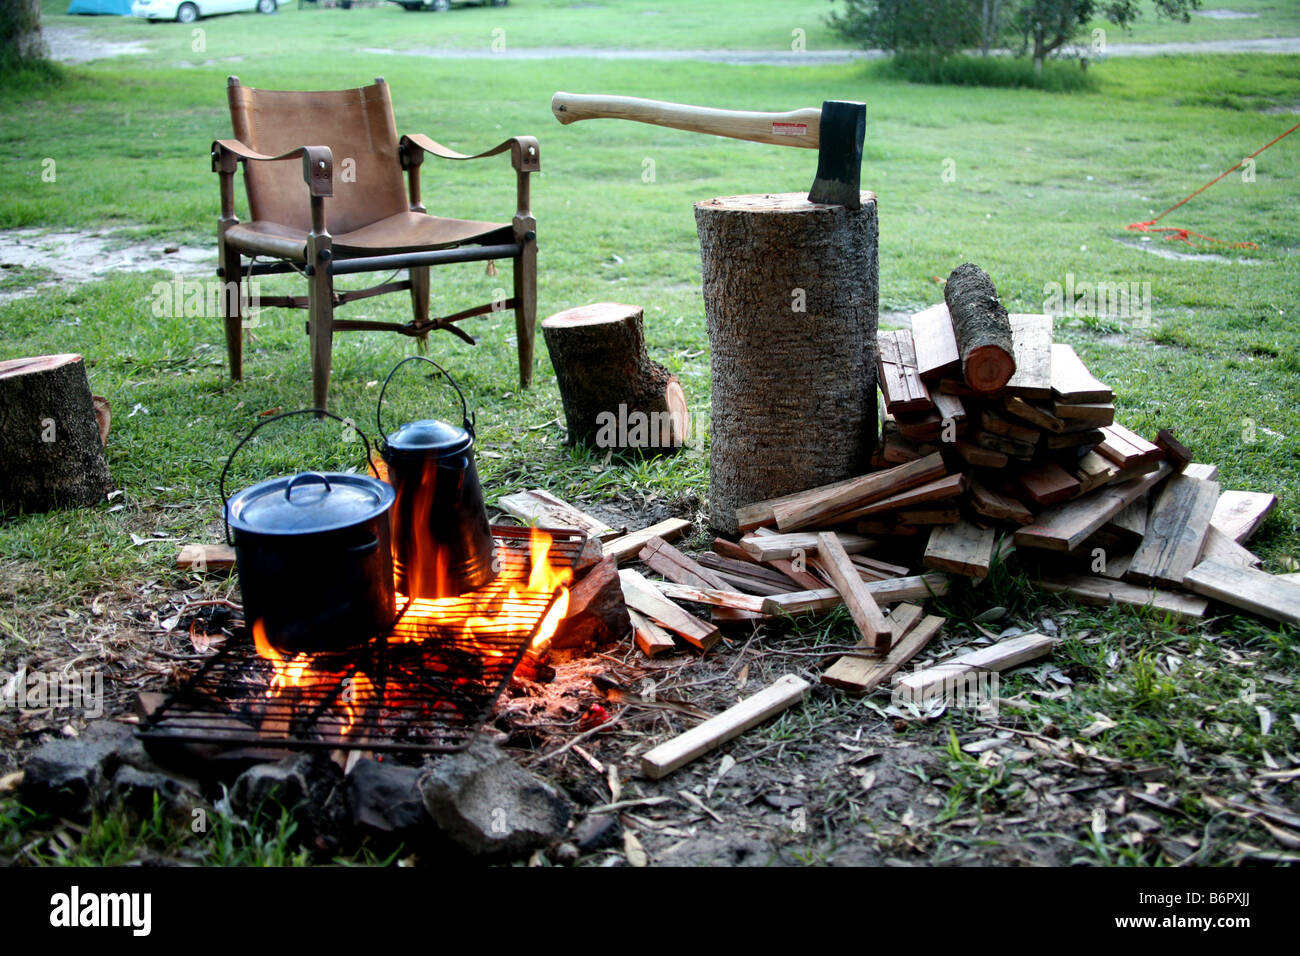 Pots and pans being used for cooking on an open fire outdoors Stock Photo